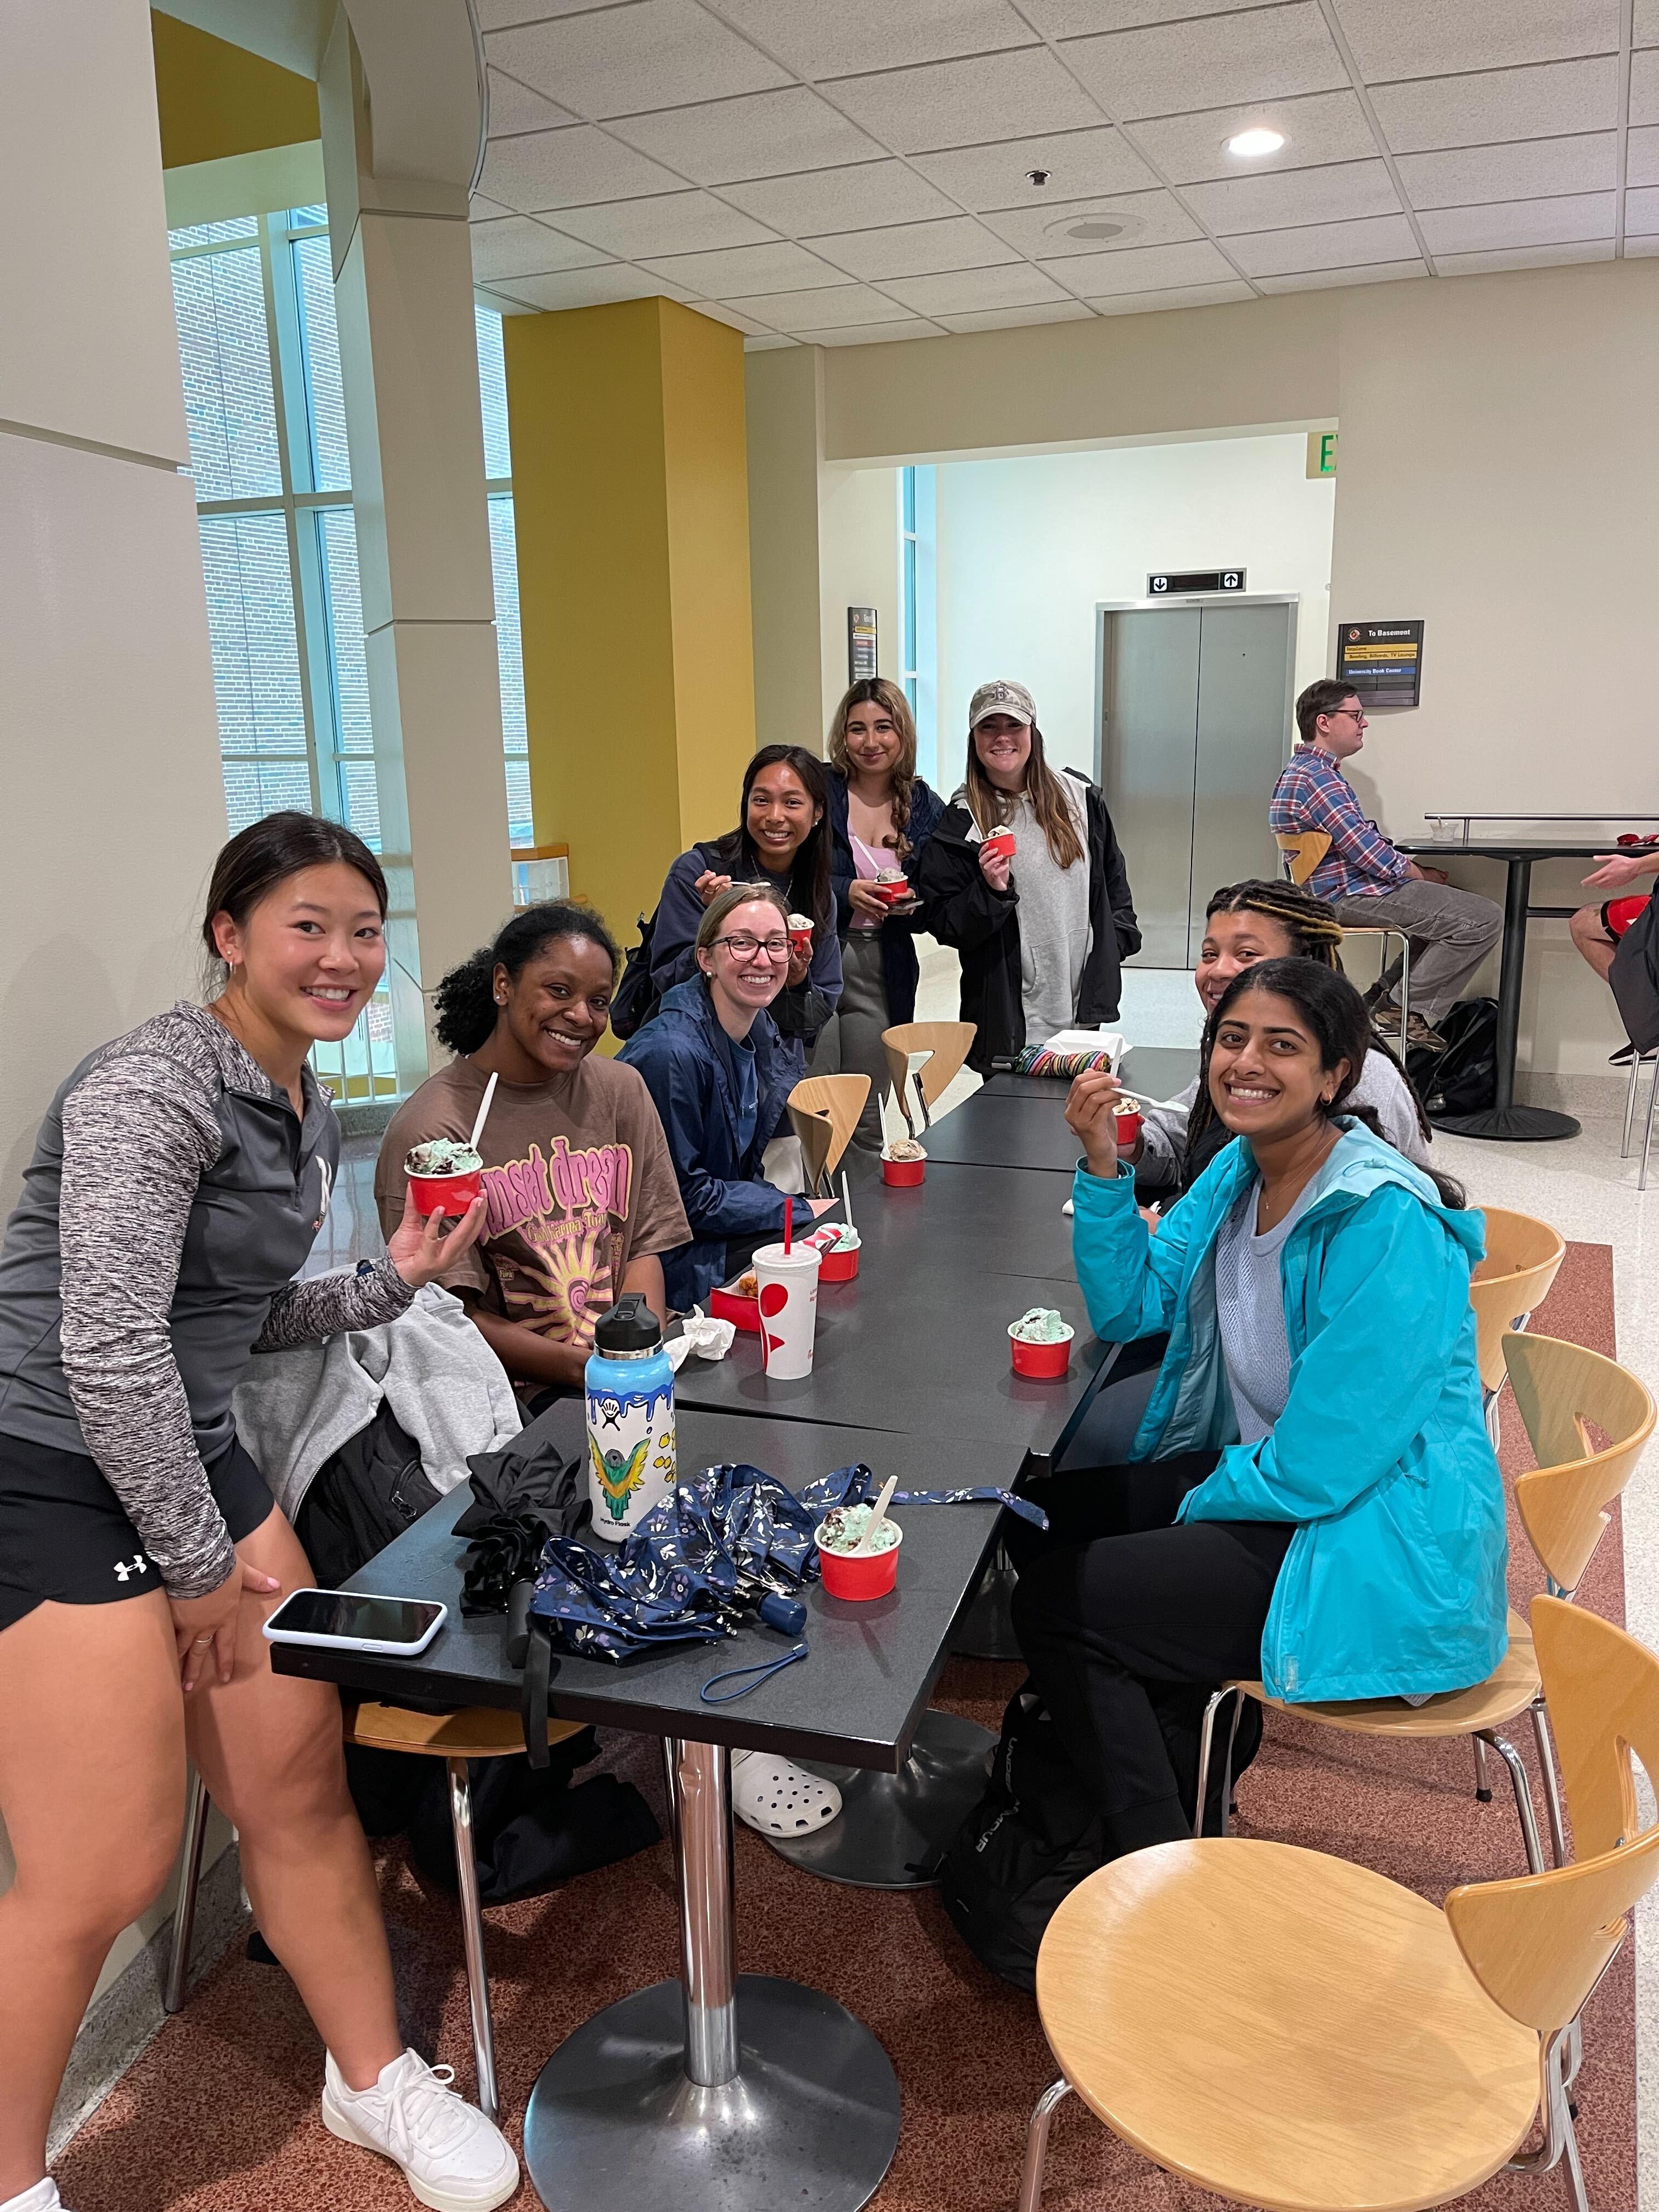 Students sit at table eating ice cream